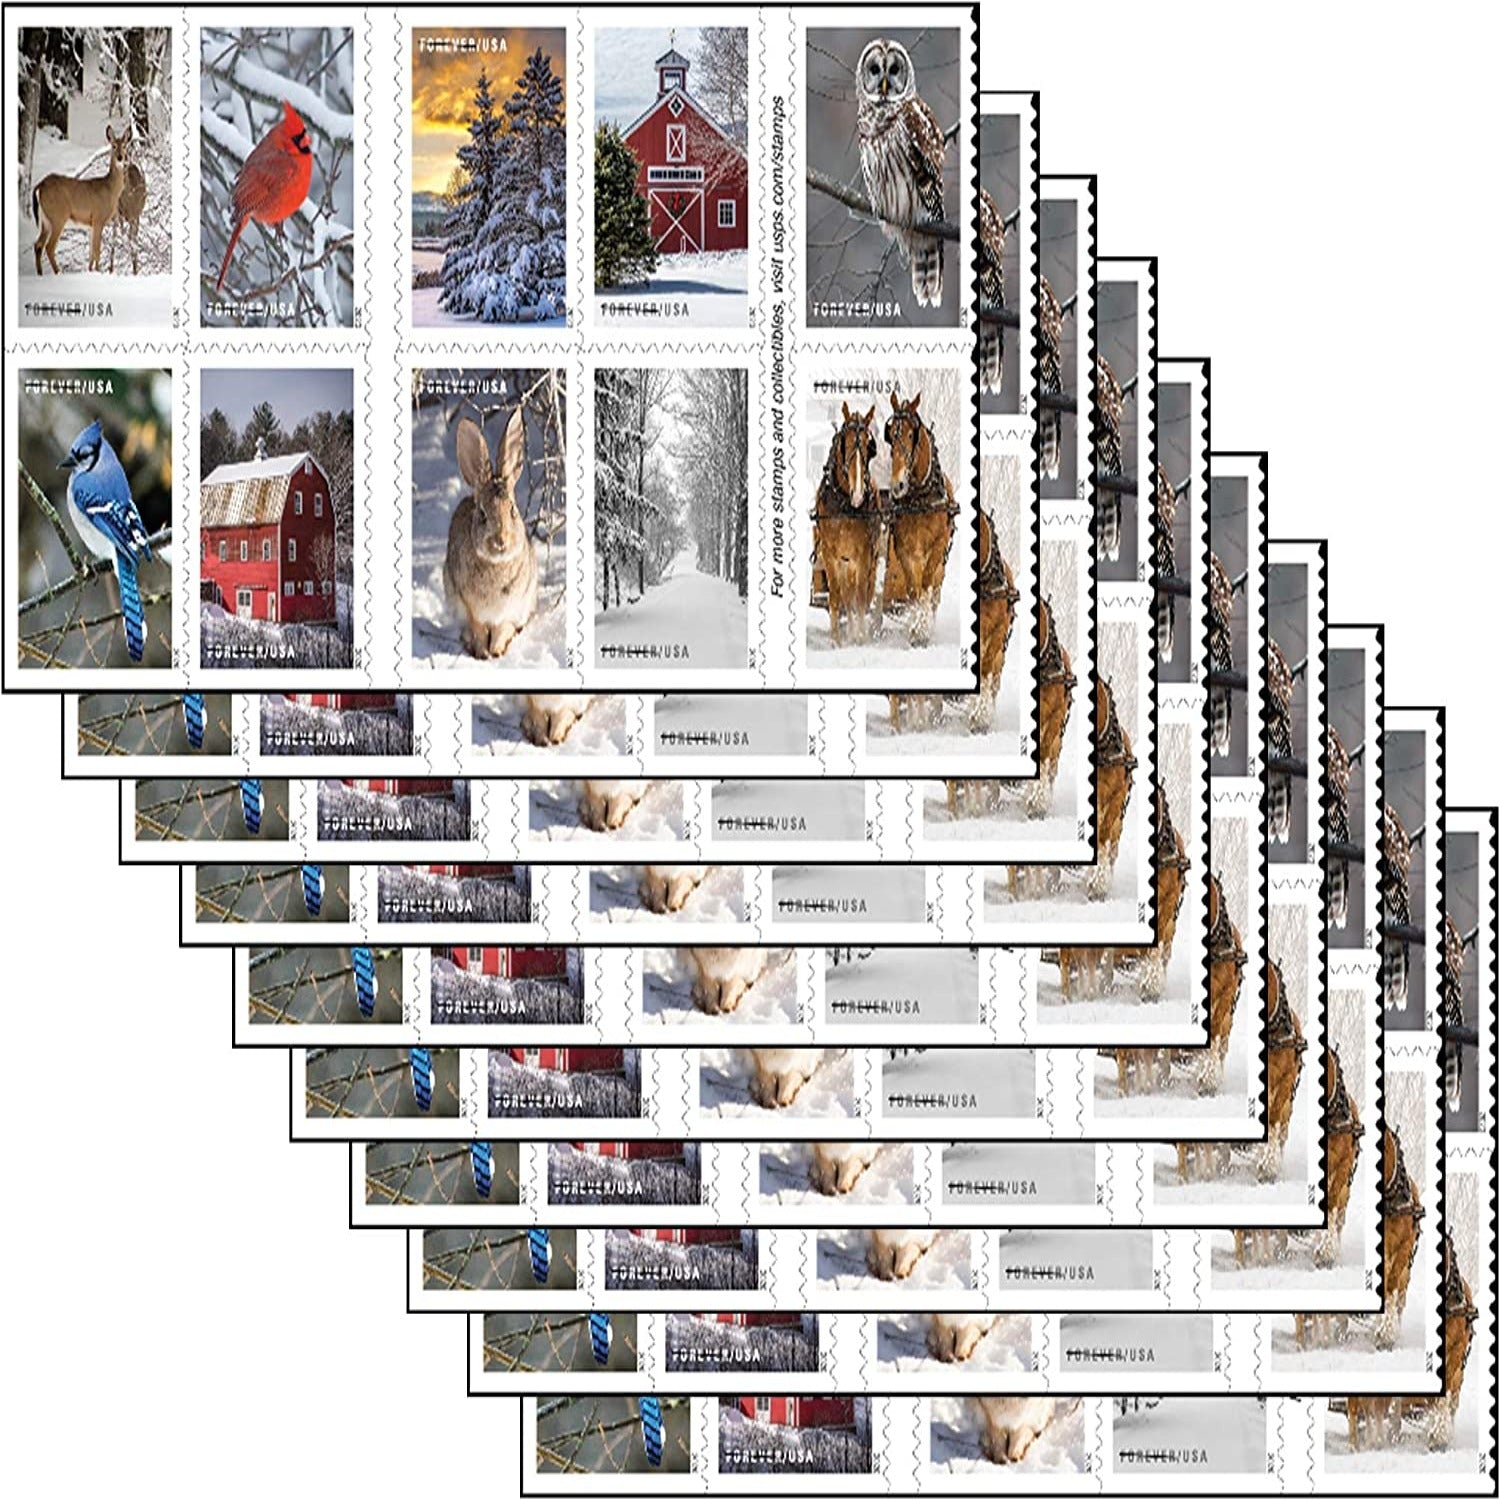 2020 Winter Scenes Forever First Class Postage Stamps